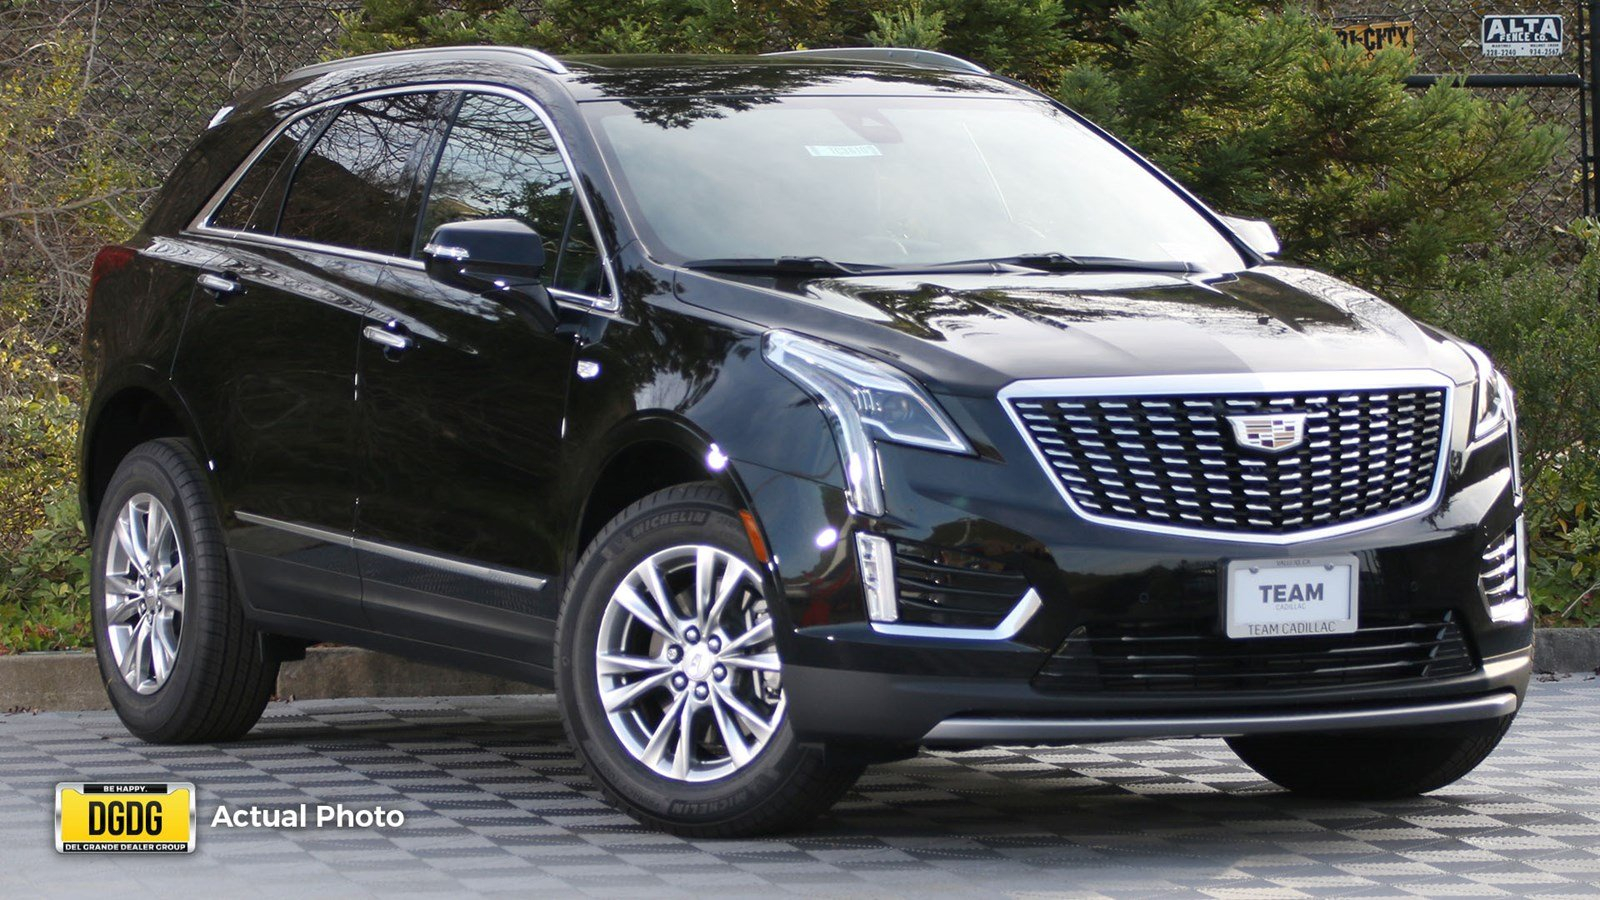 2022 Cadillac Xt5 Premium Luxury Fwd, Build And Price, Features